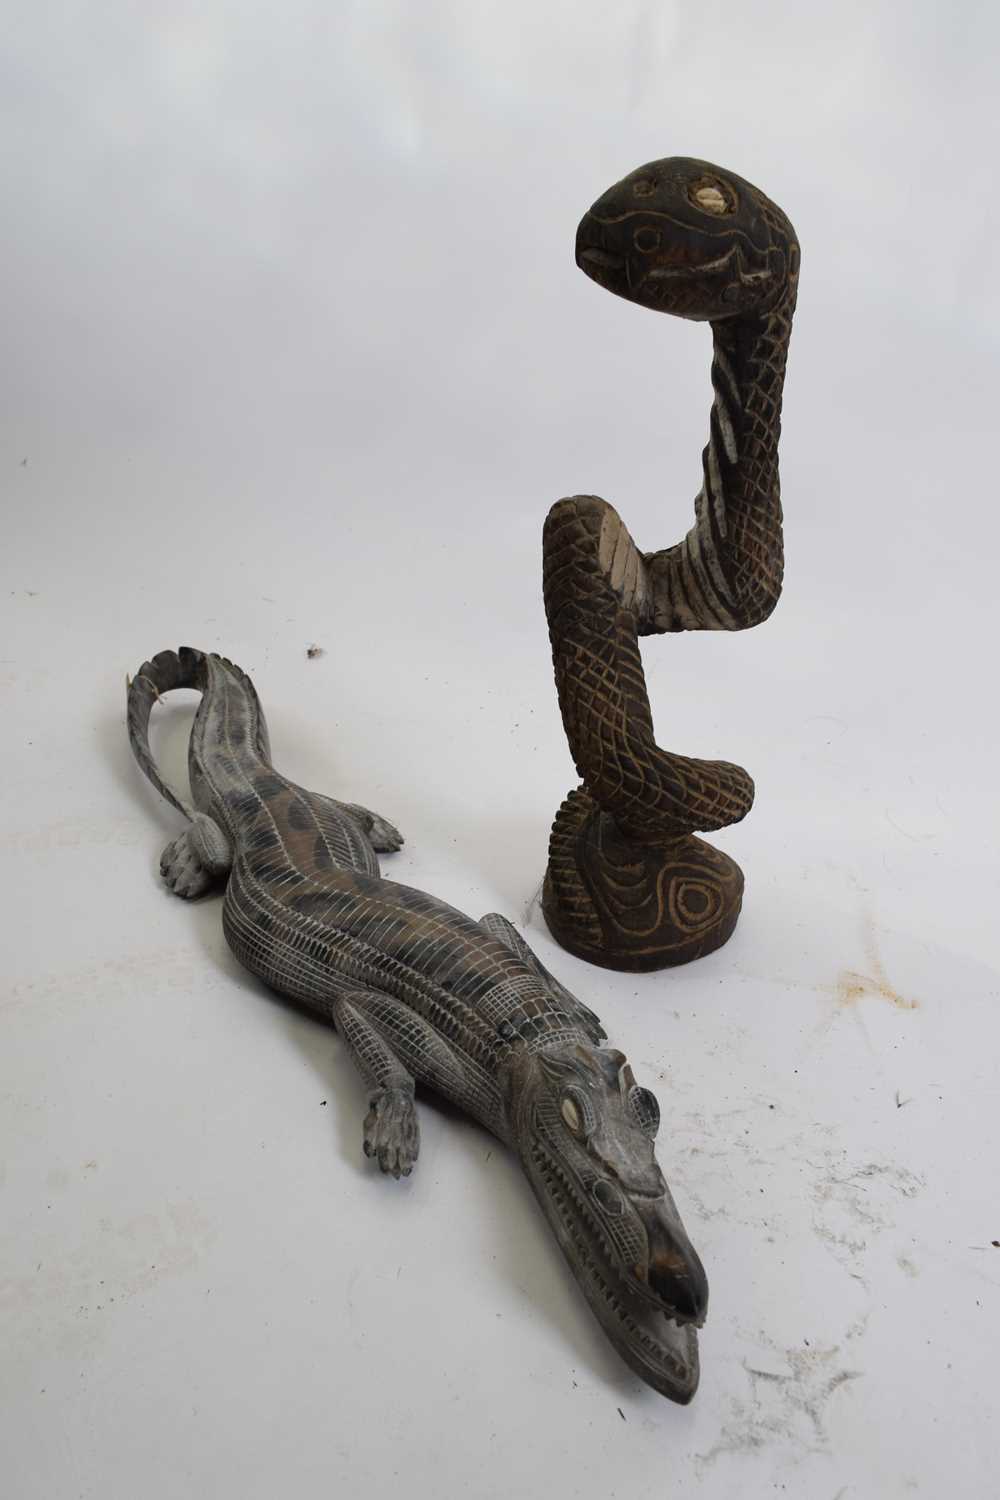 Tribal/ethnographica interest - Papua New Guinea floor standing wooden model of a snake with inset - Image 2 of 3